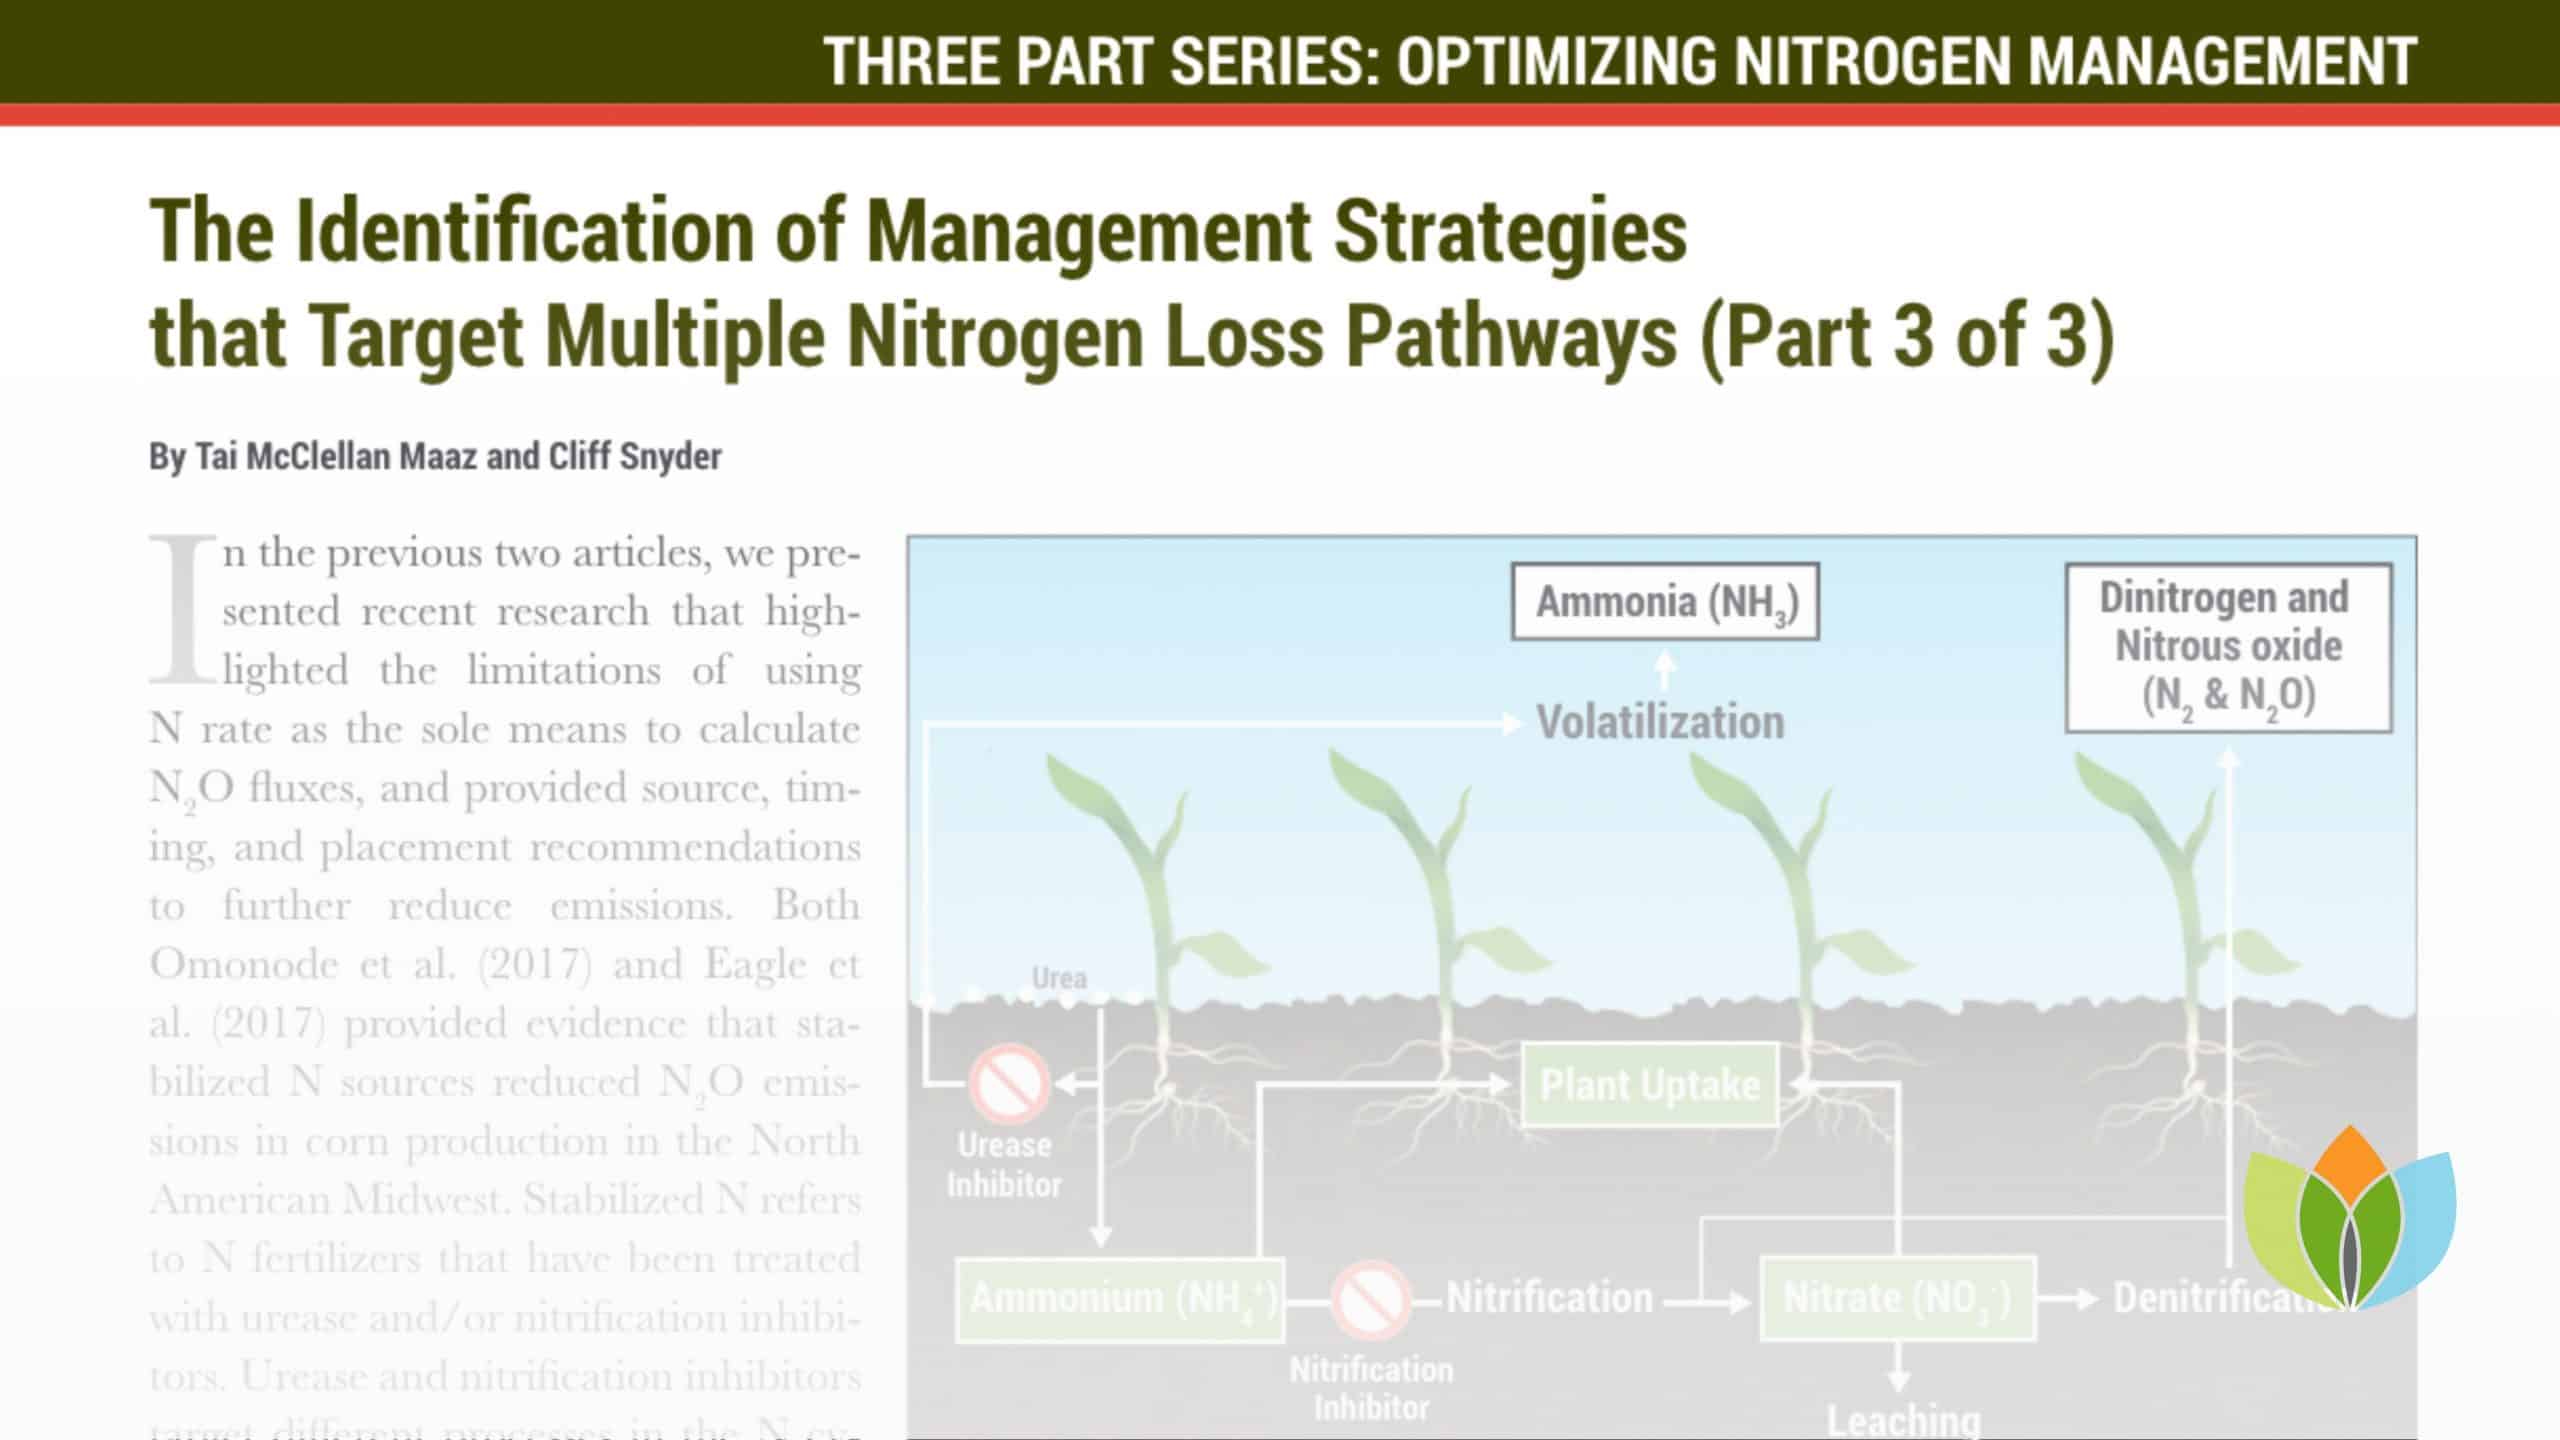 The Identification of Management Strategies that Target Multiple Nitrogen Loss Pathways (Part 3 of 3)